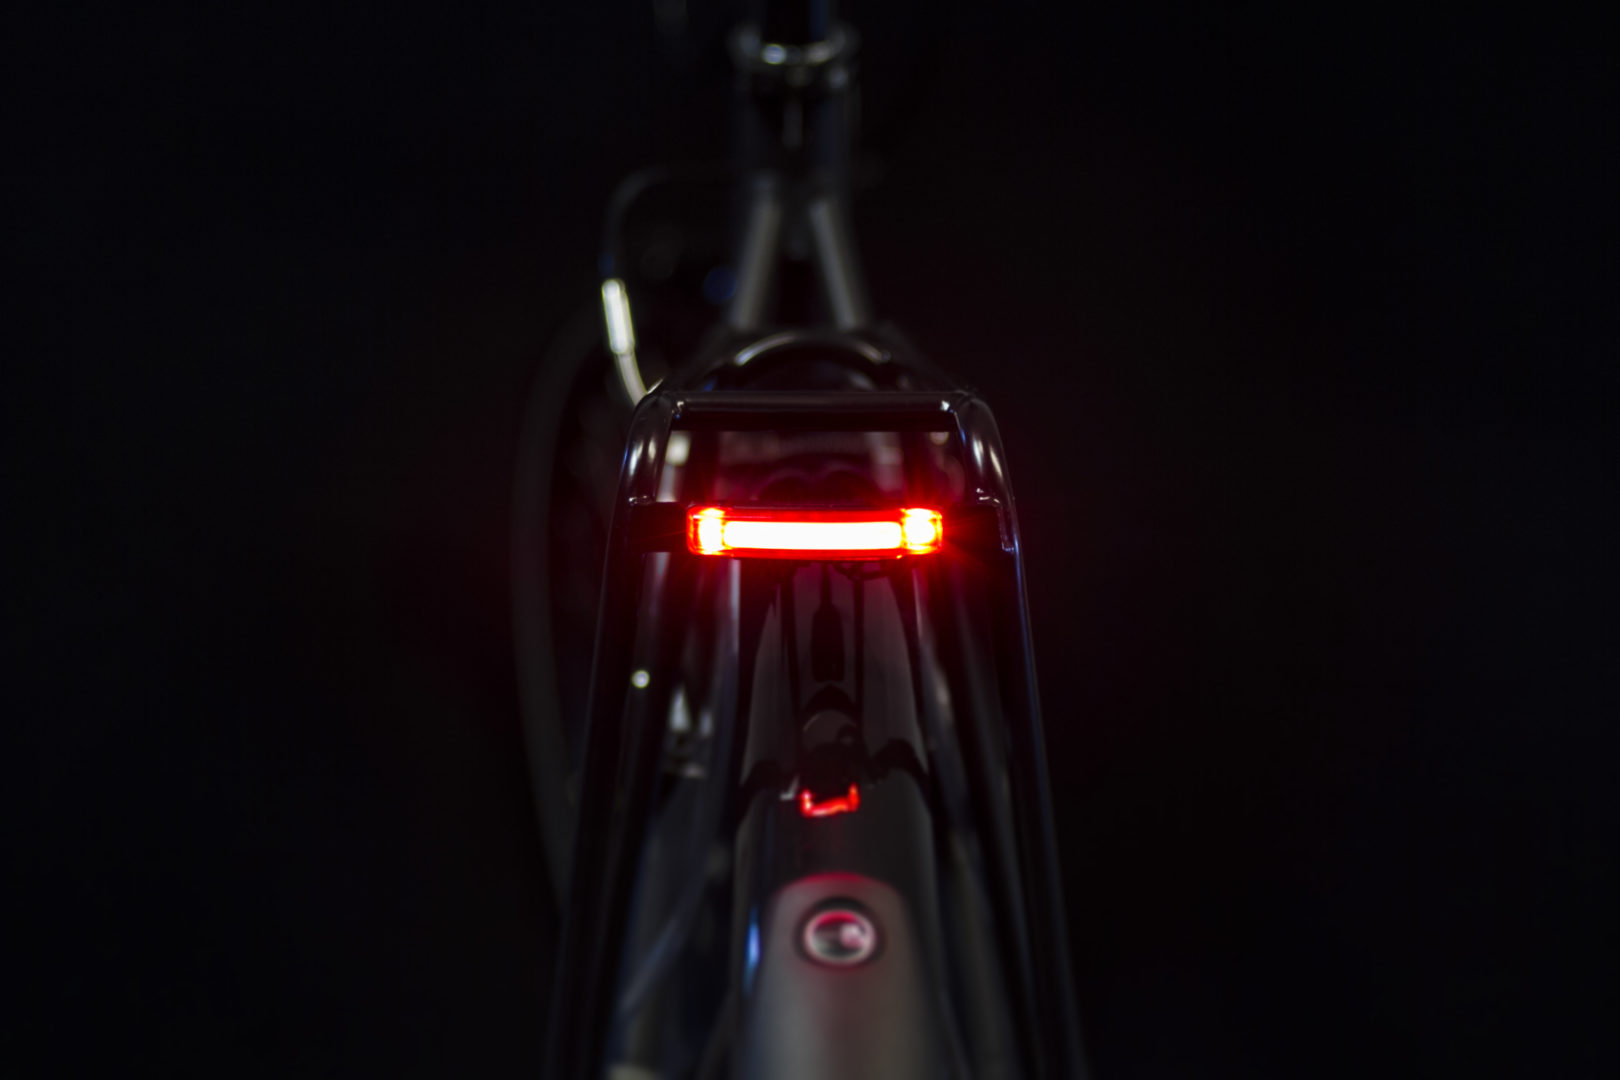 Pimento Speed rearlight for speed e-bike on bike with light and brake light on